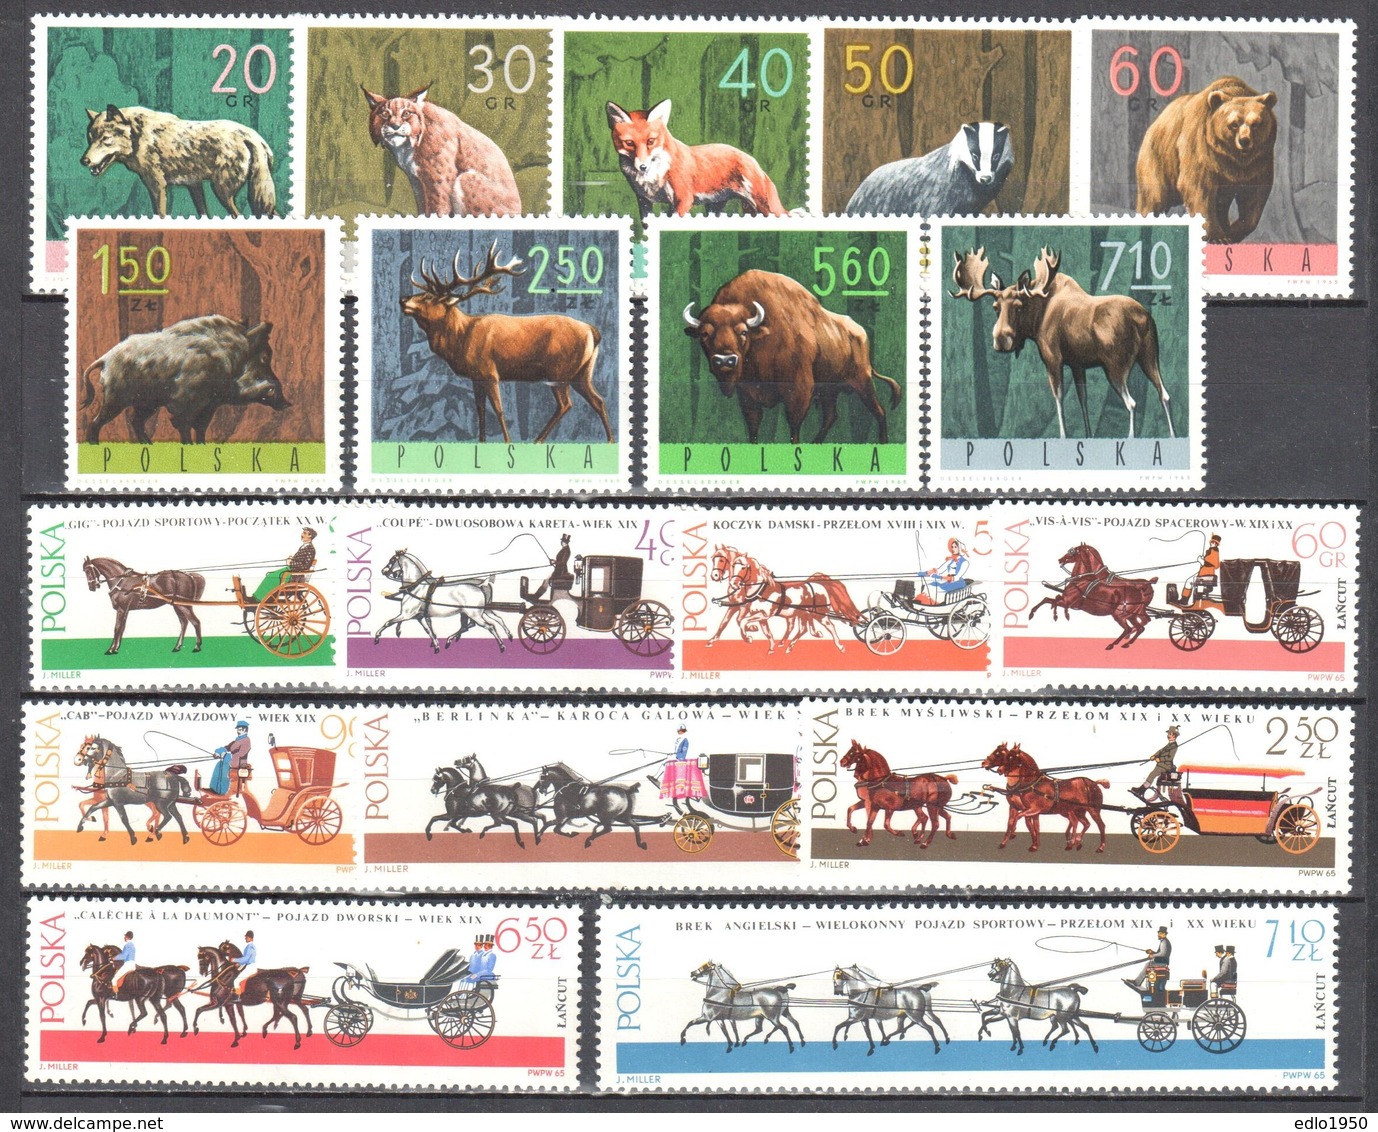 Poland 1965 - Complete Year Set - MNH (**) - Full Years